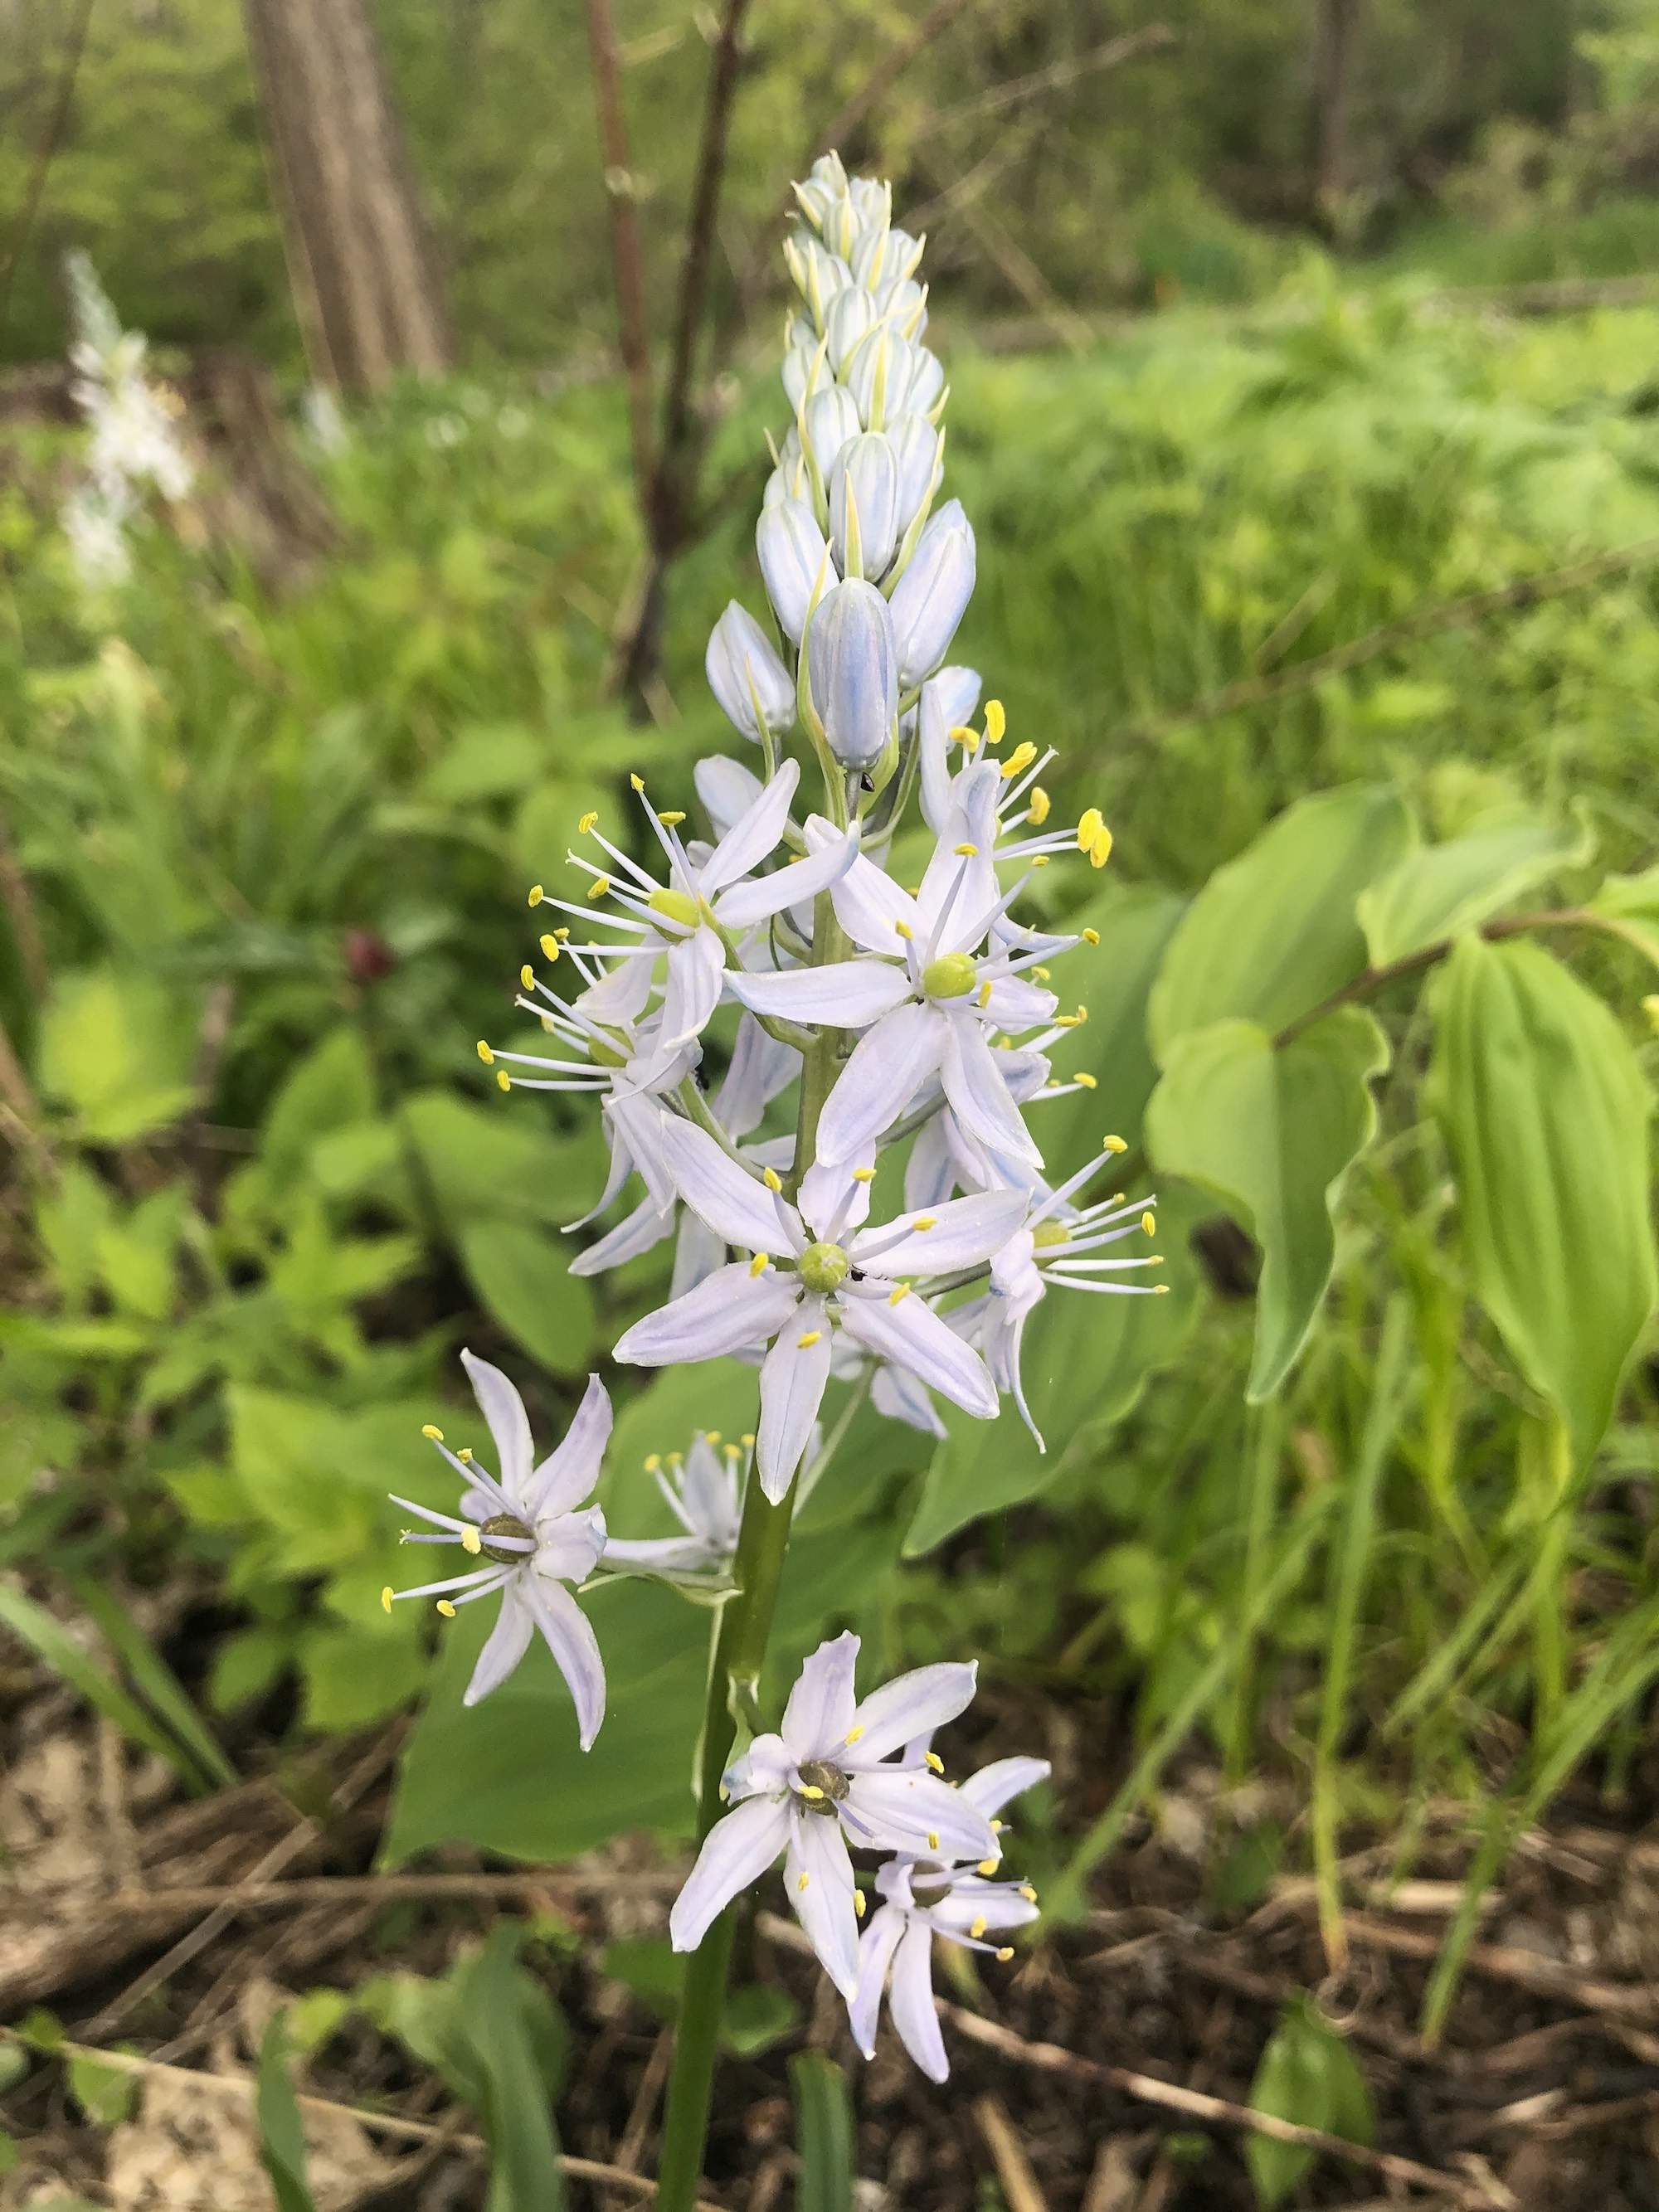 Wild Hyacinth by Council Ring in Oak Savanna on May 10, 2021.